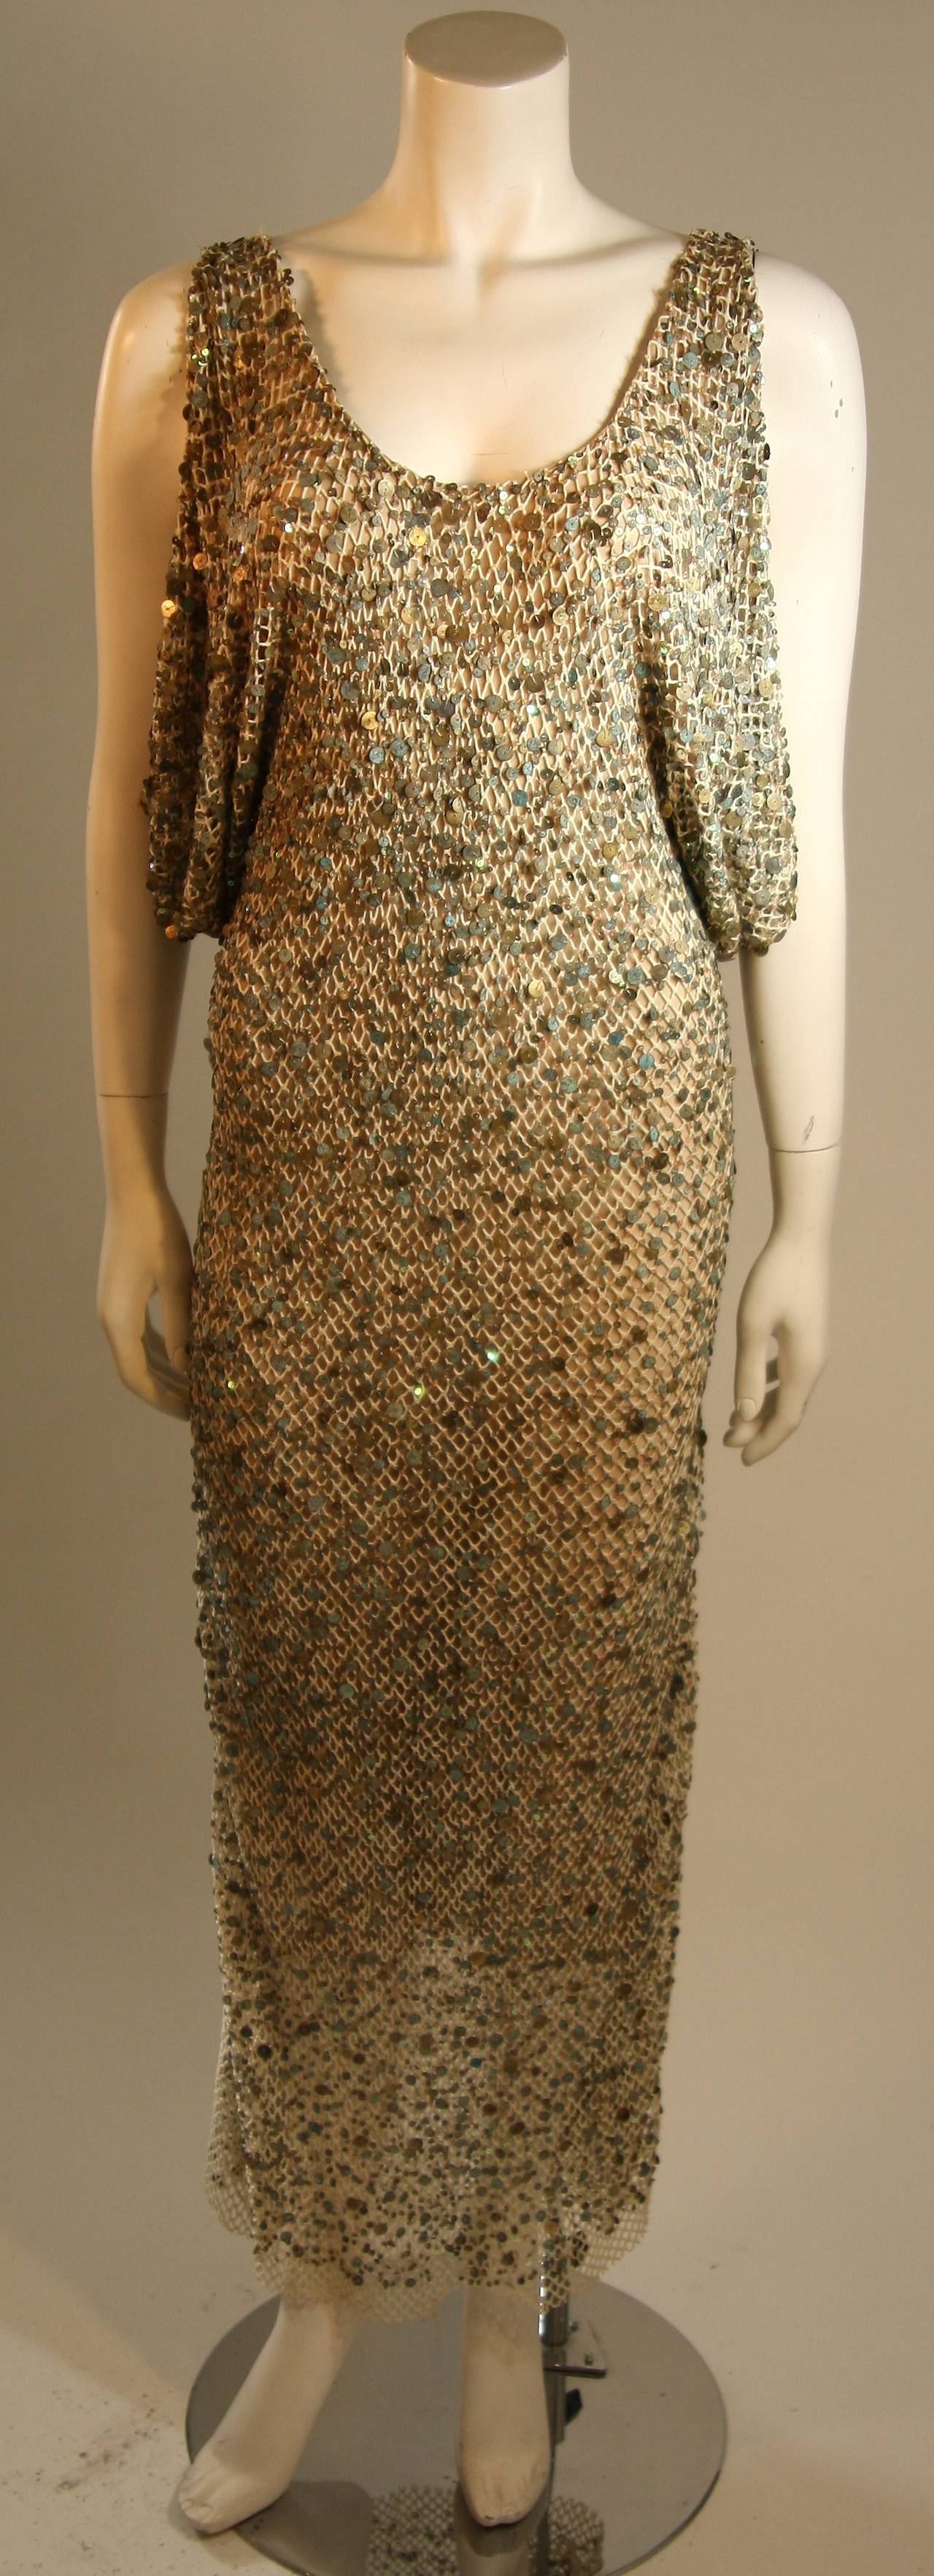 This is a Heike Jarick design. This dress is composed of a mesh layered with a thick/wide weave cotton that is embellished by weathered paillettes. The color of the embellishments range from an aqua to white and bronze. This dress has a stunning